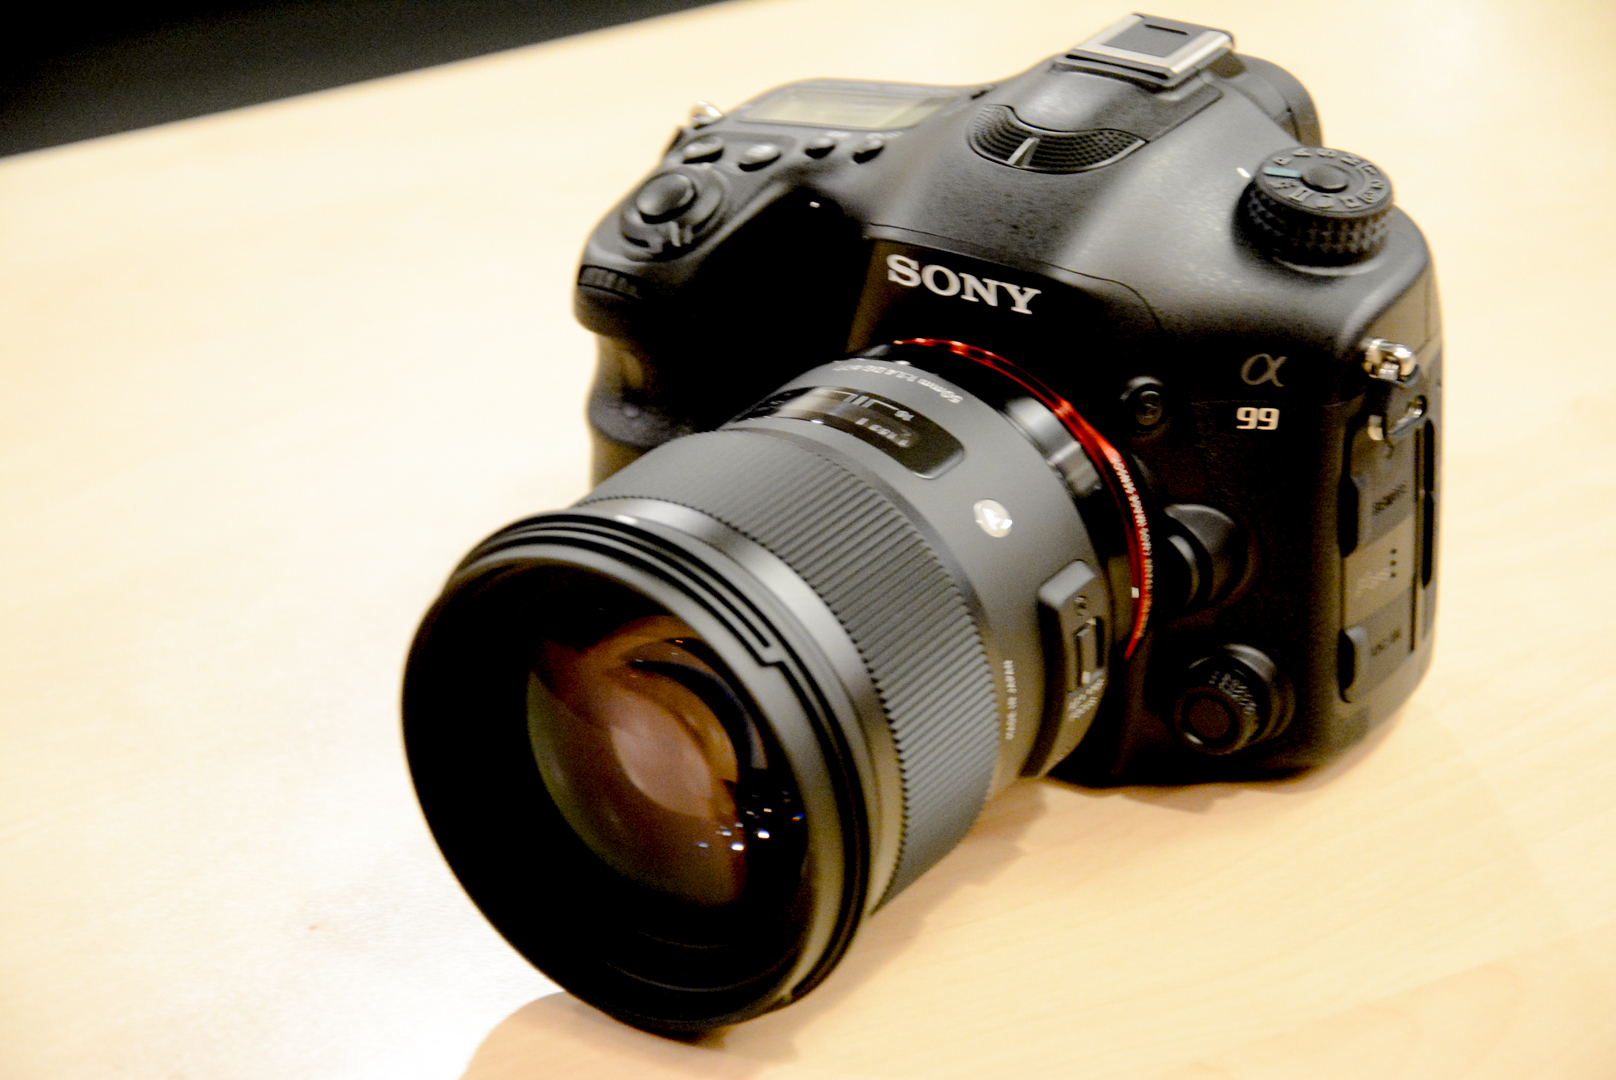 First hot sexy pictures of the new 50mm Art lens on the Sony A99.